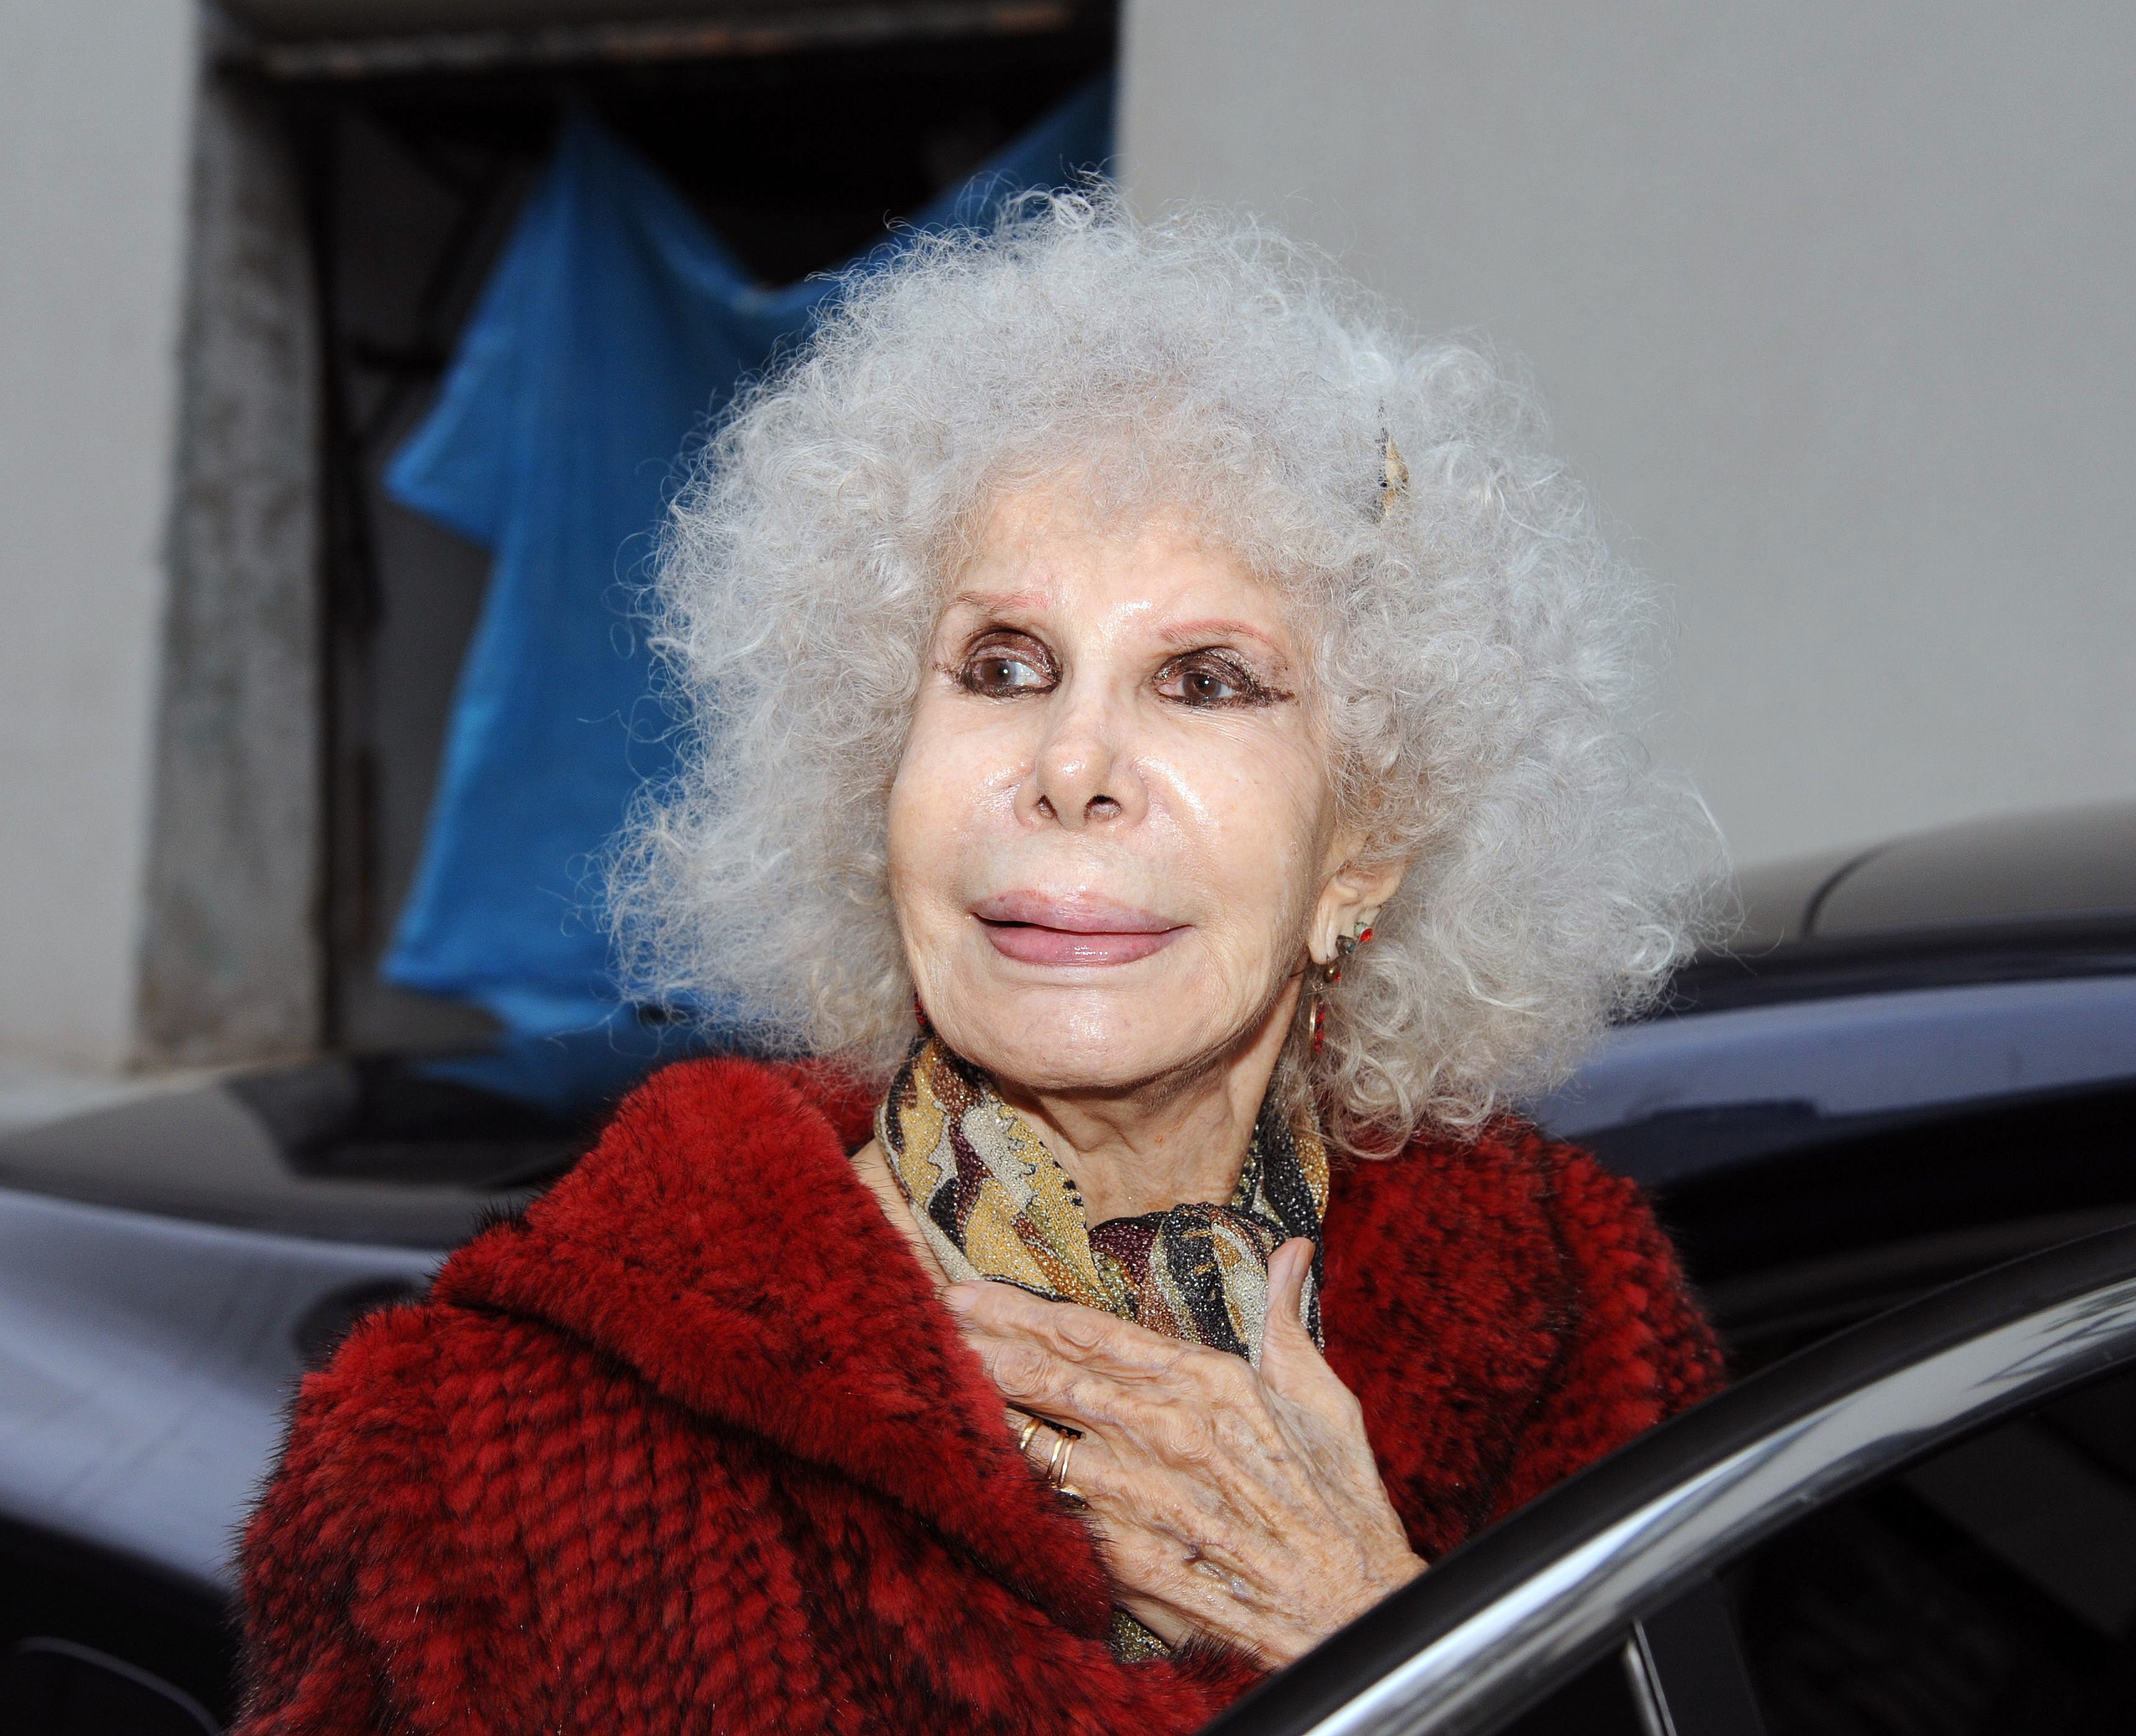 A picture of Spain's treasured royal, the Duchess of Alba | Photo: Getty Images